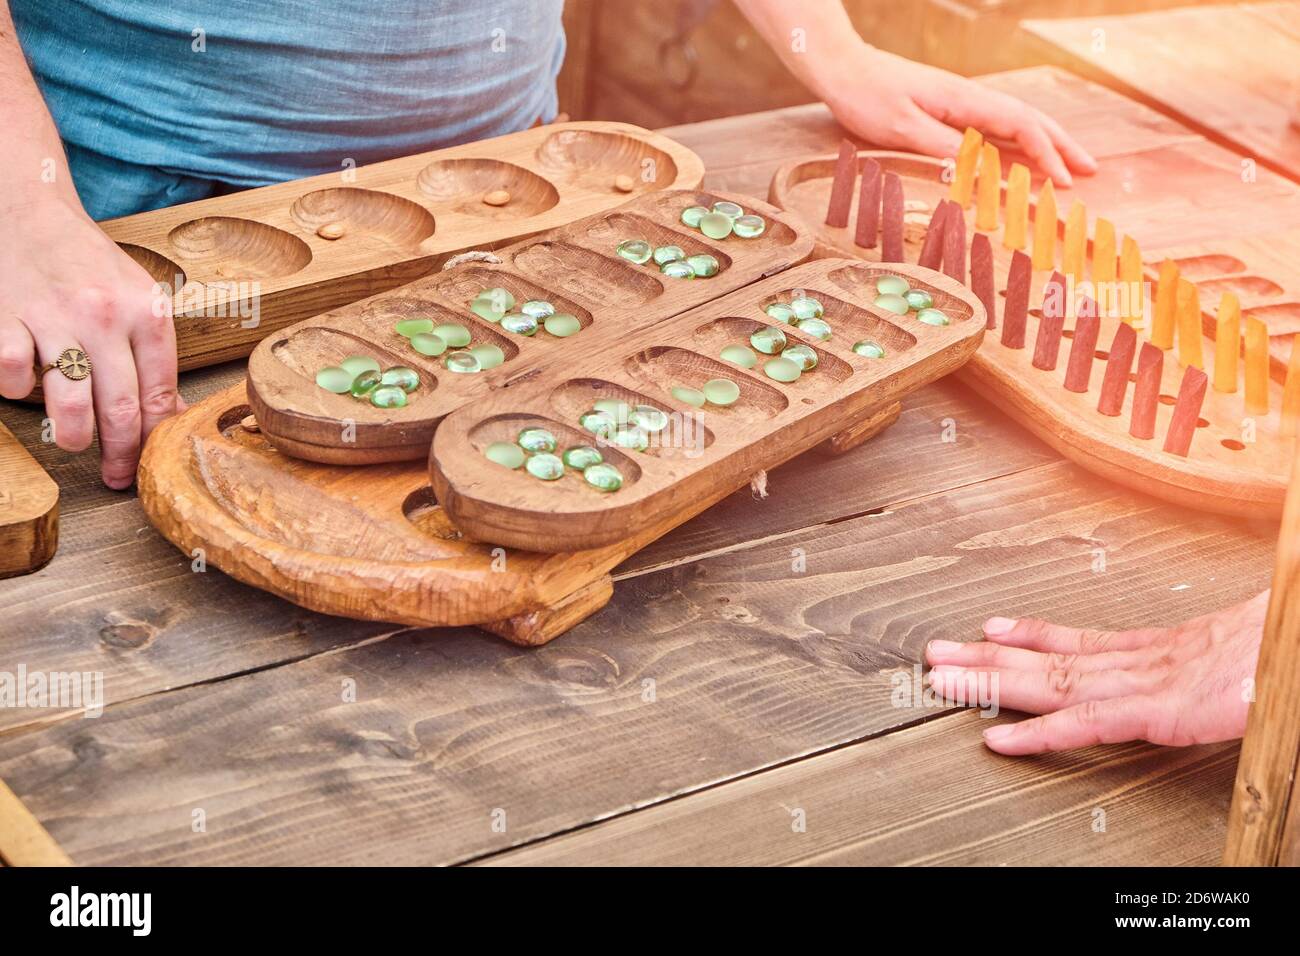 Ovare is a board logic game for two from vintage mancala games. Two players play the retro boardgame Kalah. Stock Photo